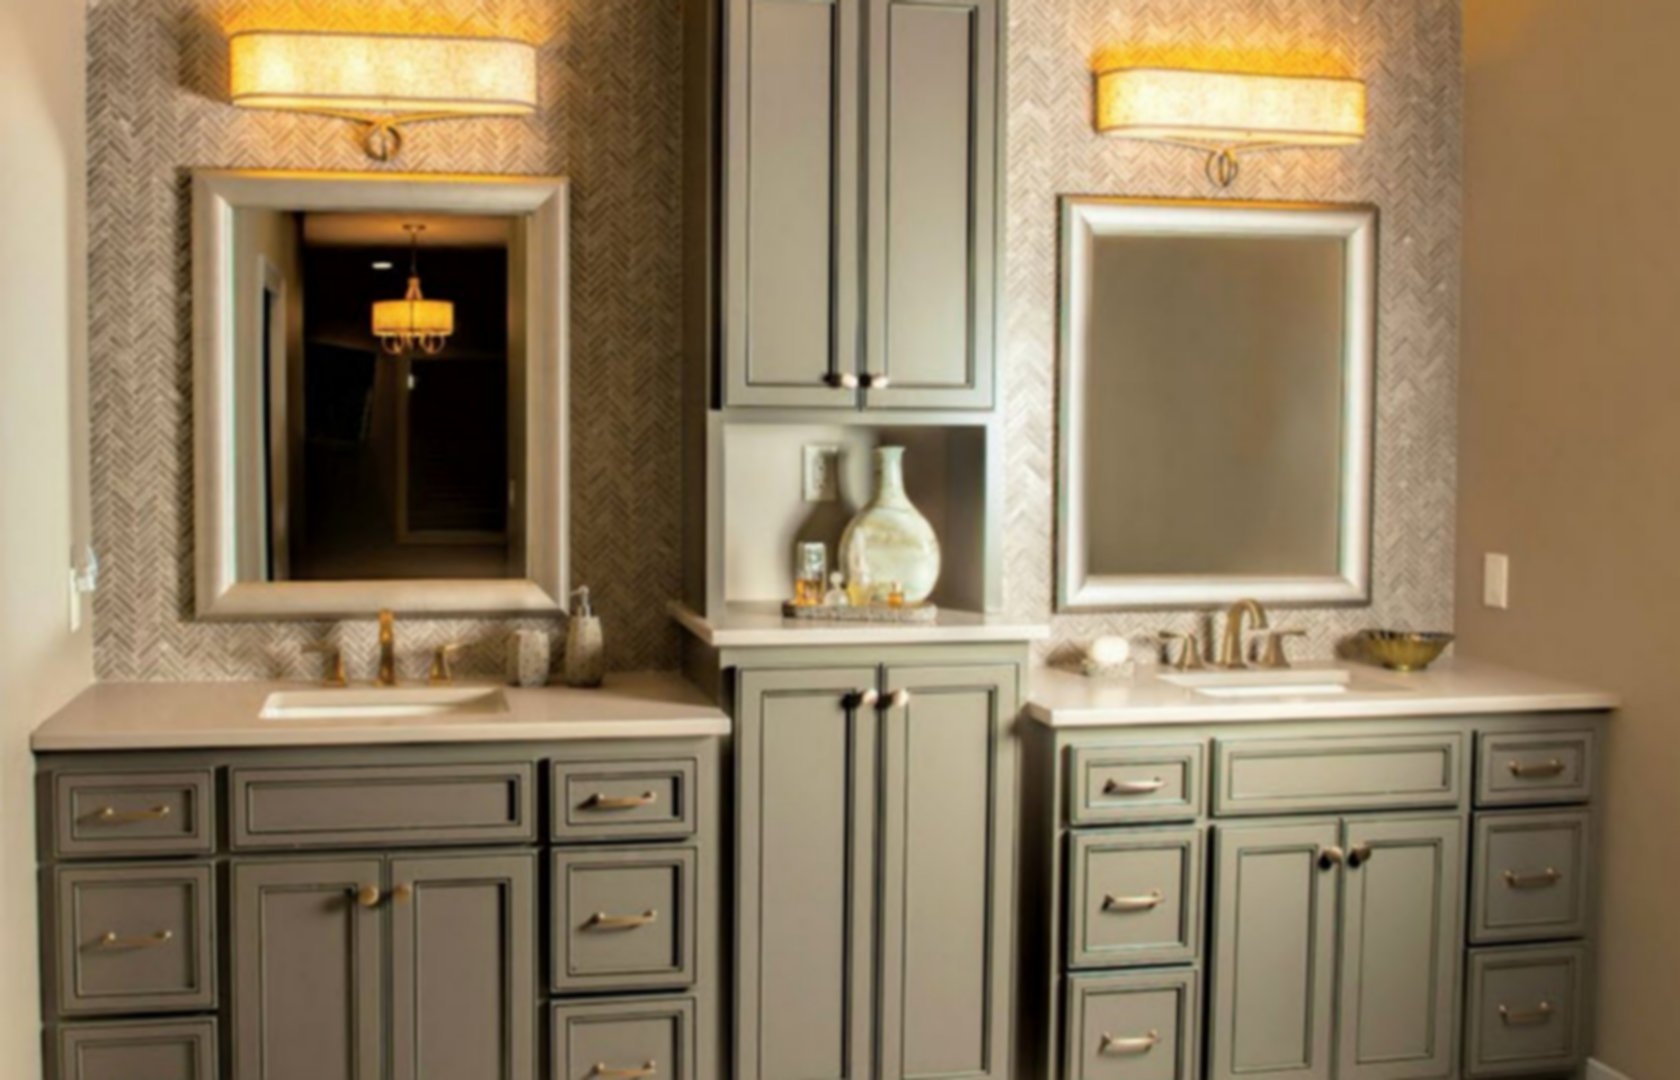 Bathroom Vanity And Linen Cabinet Combo, Double Vanity With Storage Tower In The Middle